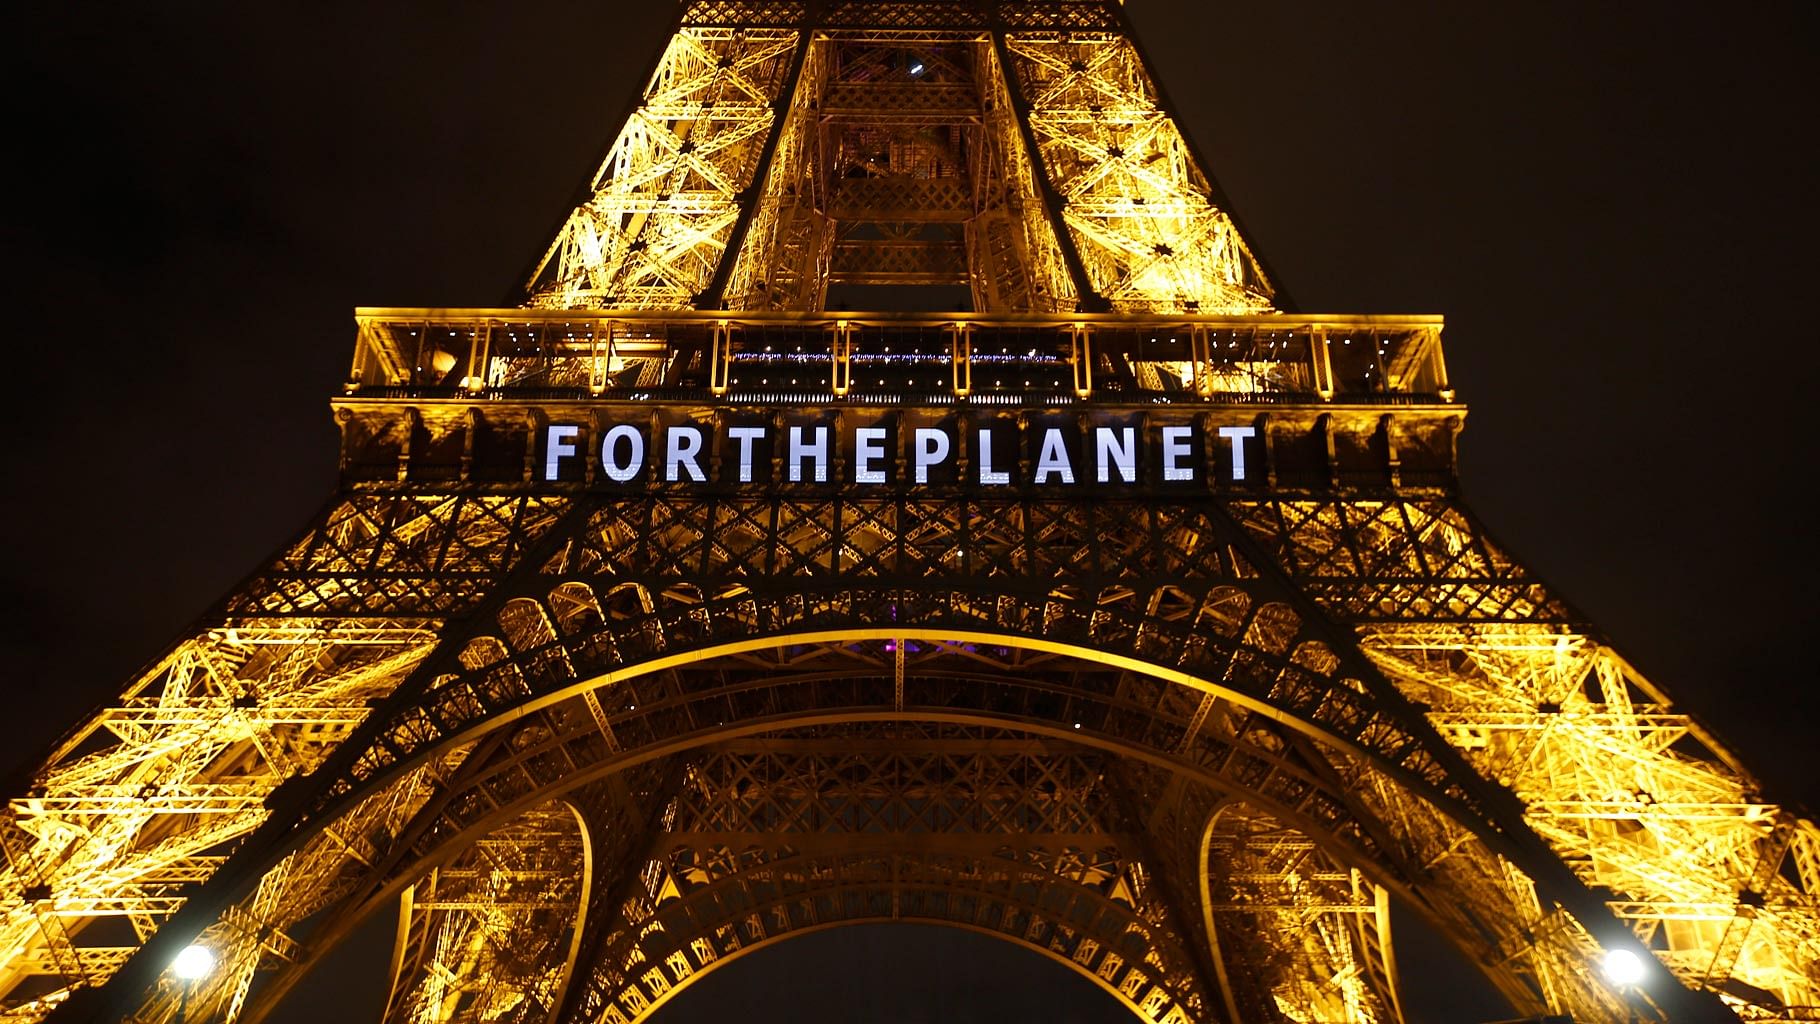 The slogan “FOR THE PLANET” projected on the Eiffel Tower as part of the COP21, United Nations Climate Change Conference in Paris, France. (Photo: AP)